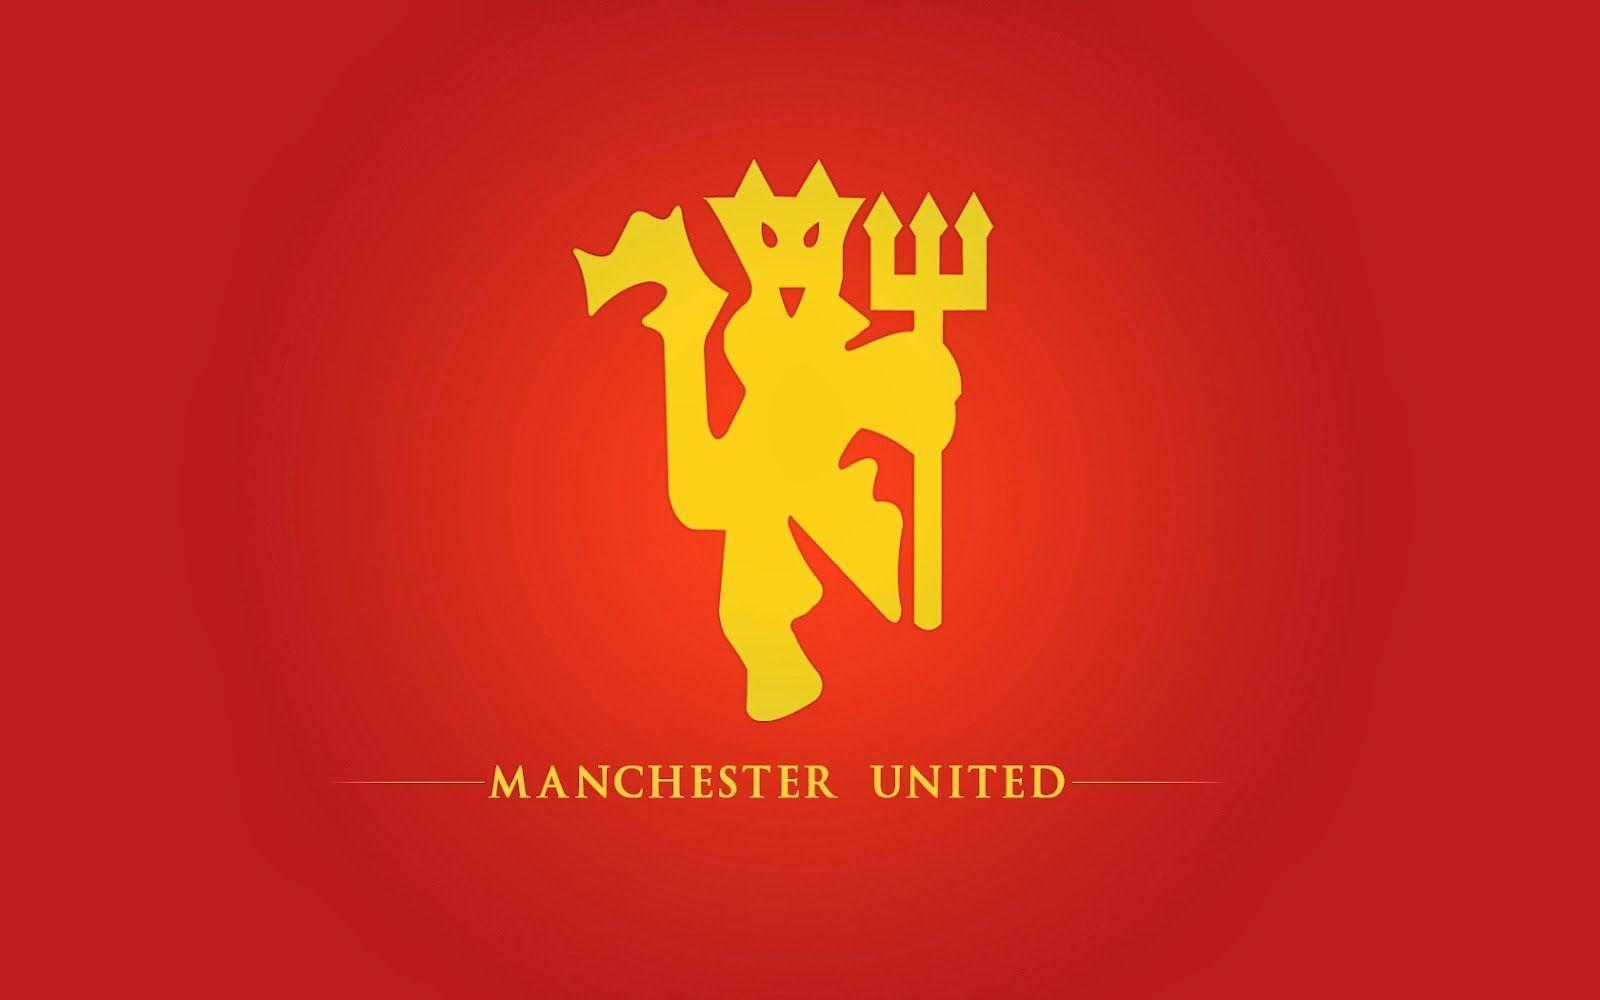 Manchester united logo wallpapers hd